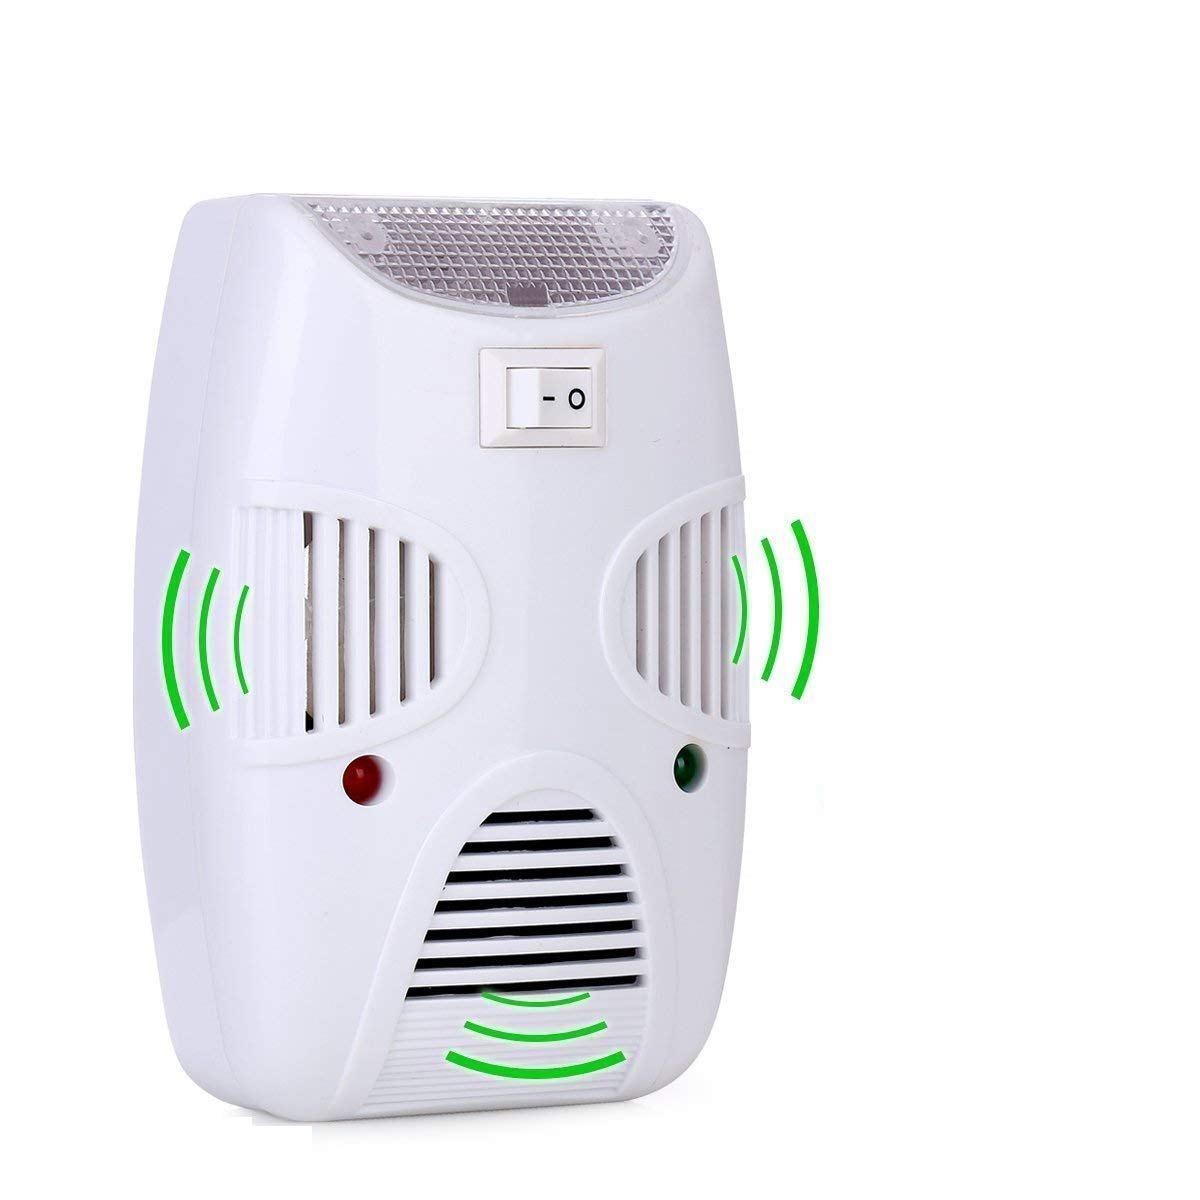 Riddex Ultrasonic Electromagnetic Pest Repelling Aid